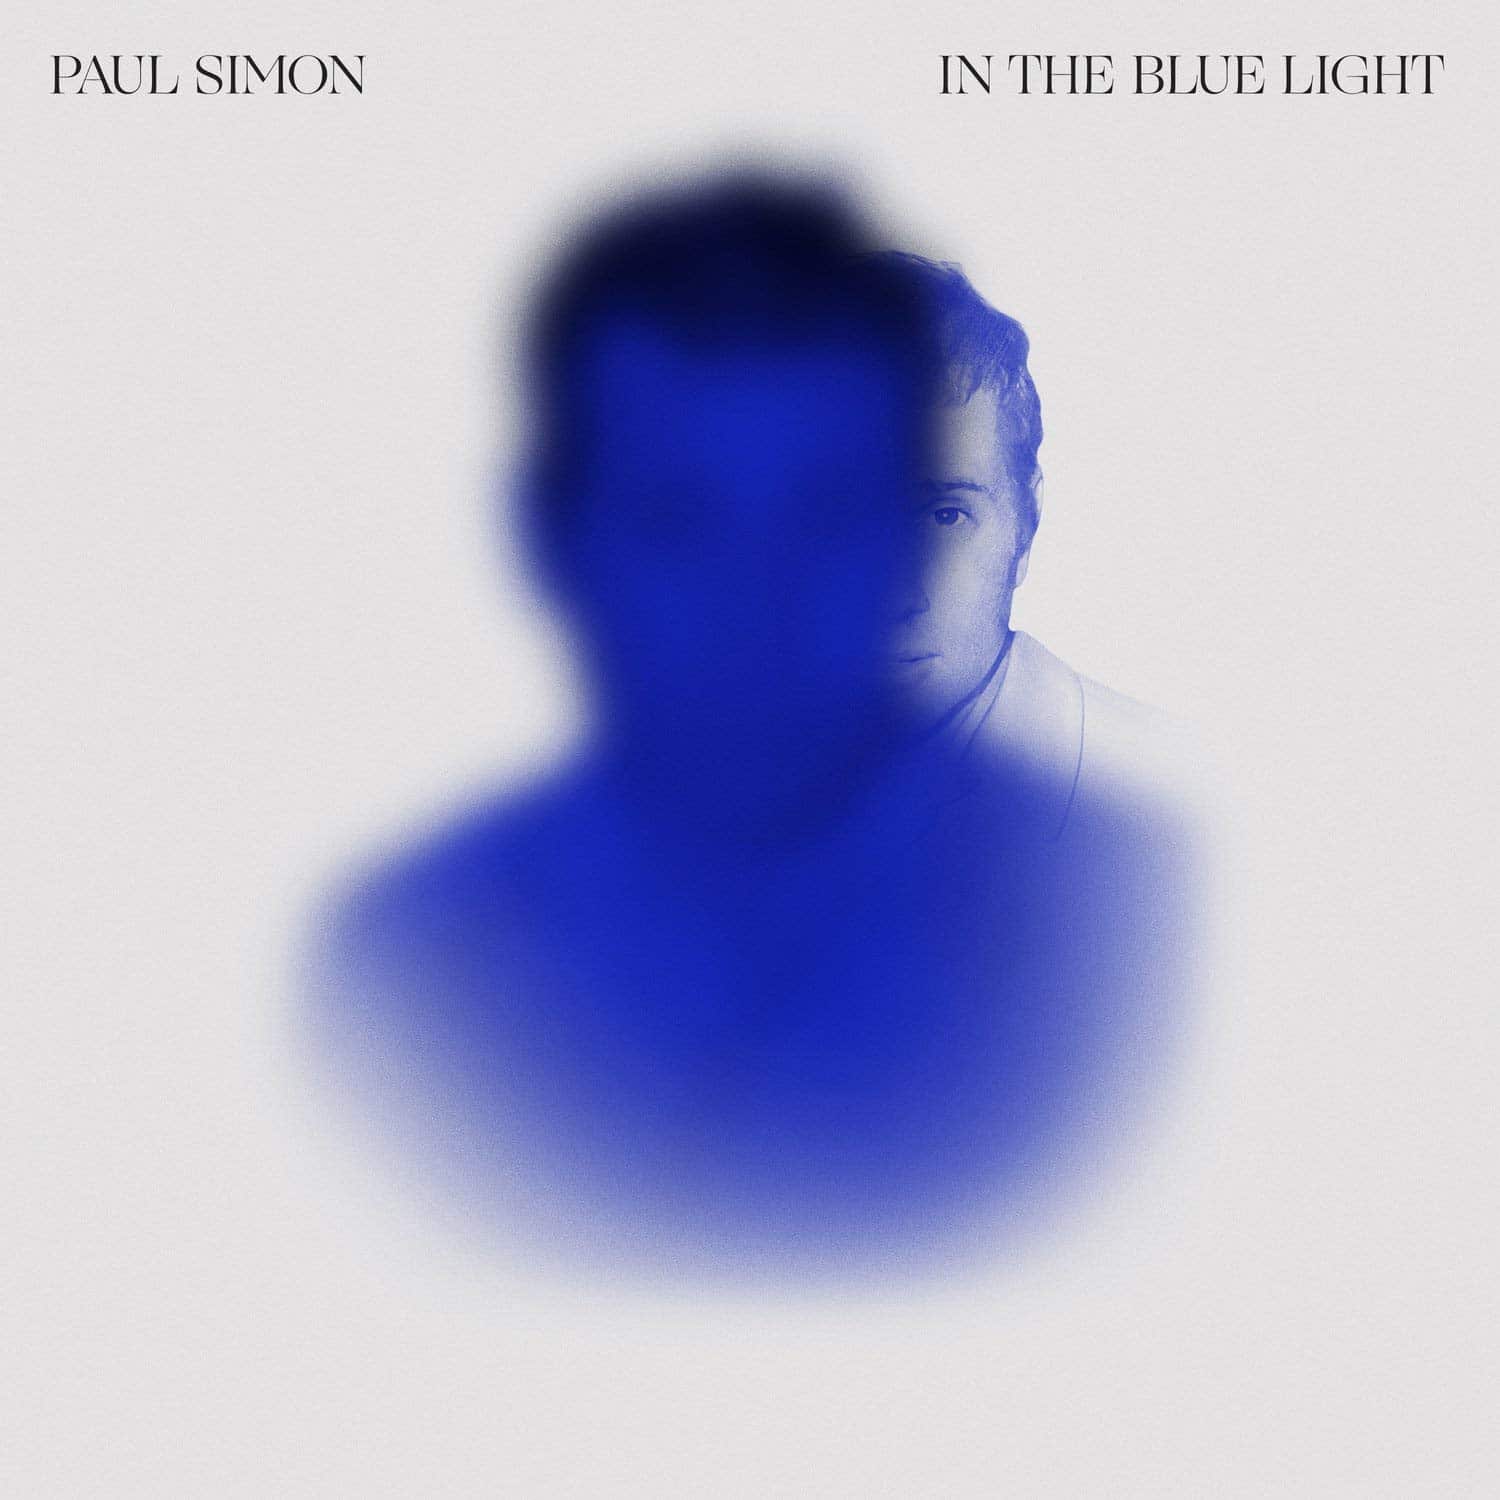 Hear Paul Simon’s Revamped “One Man’s Ceiling Is Another Man’s Floor” From Forthcoming Album In The Blue Light